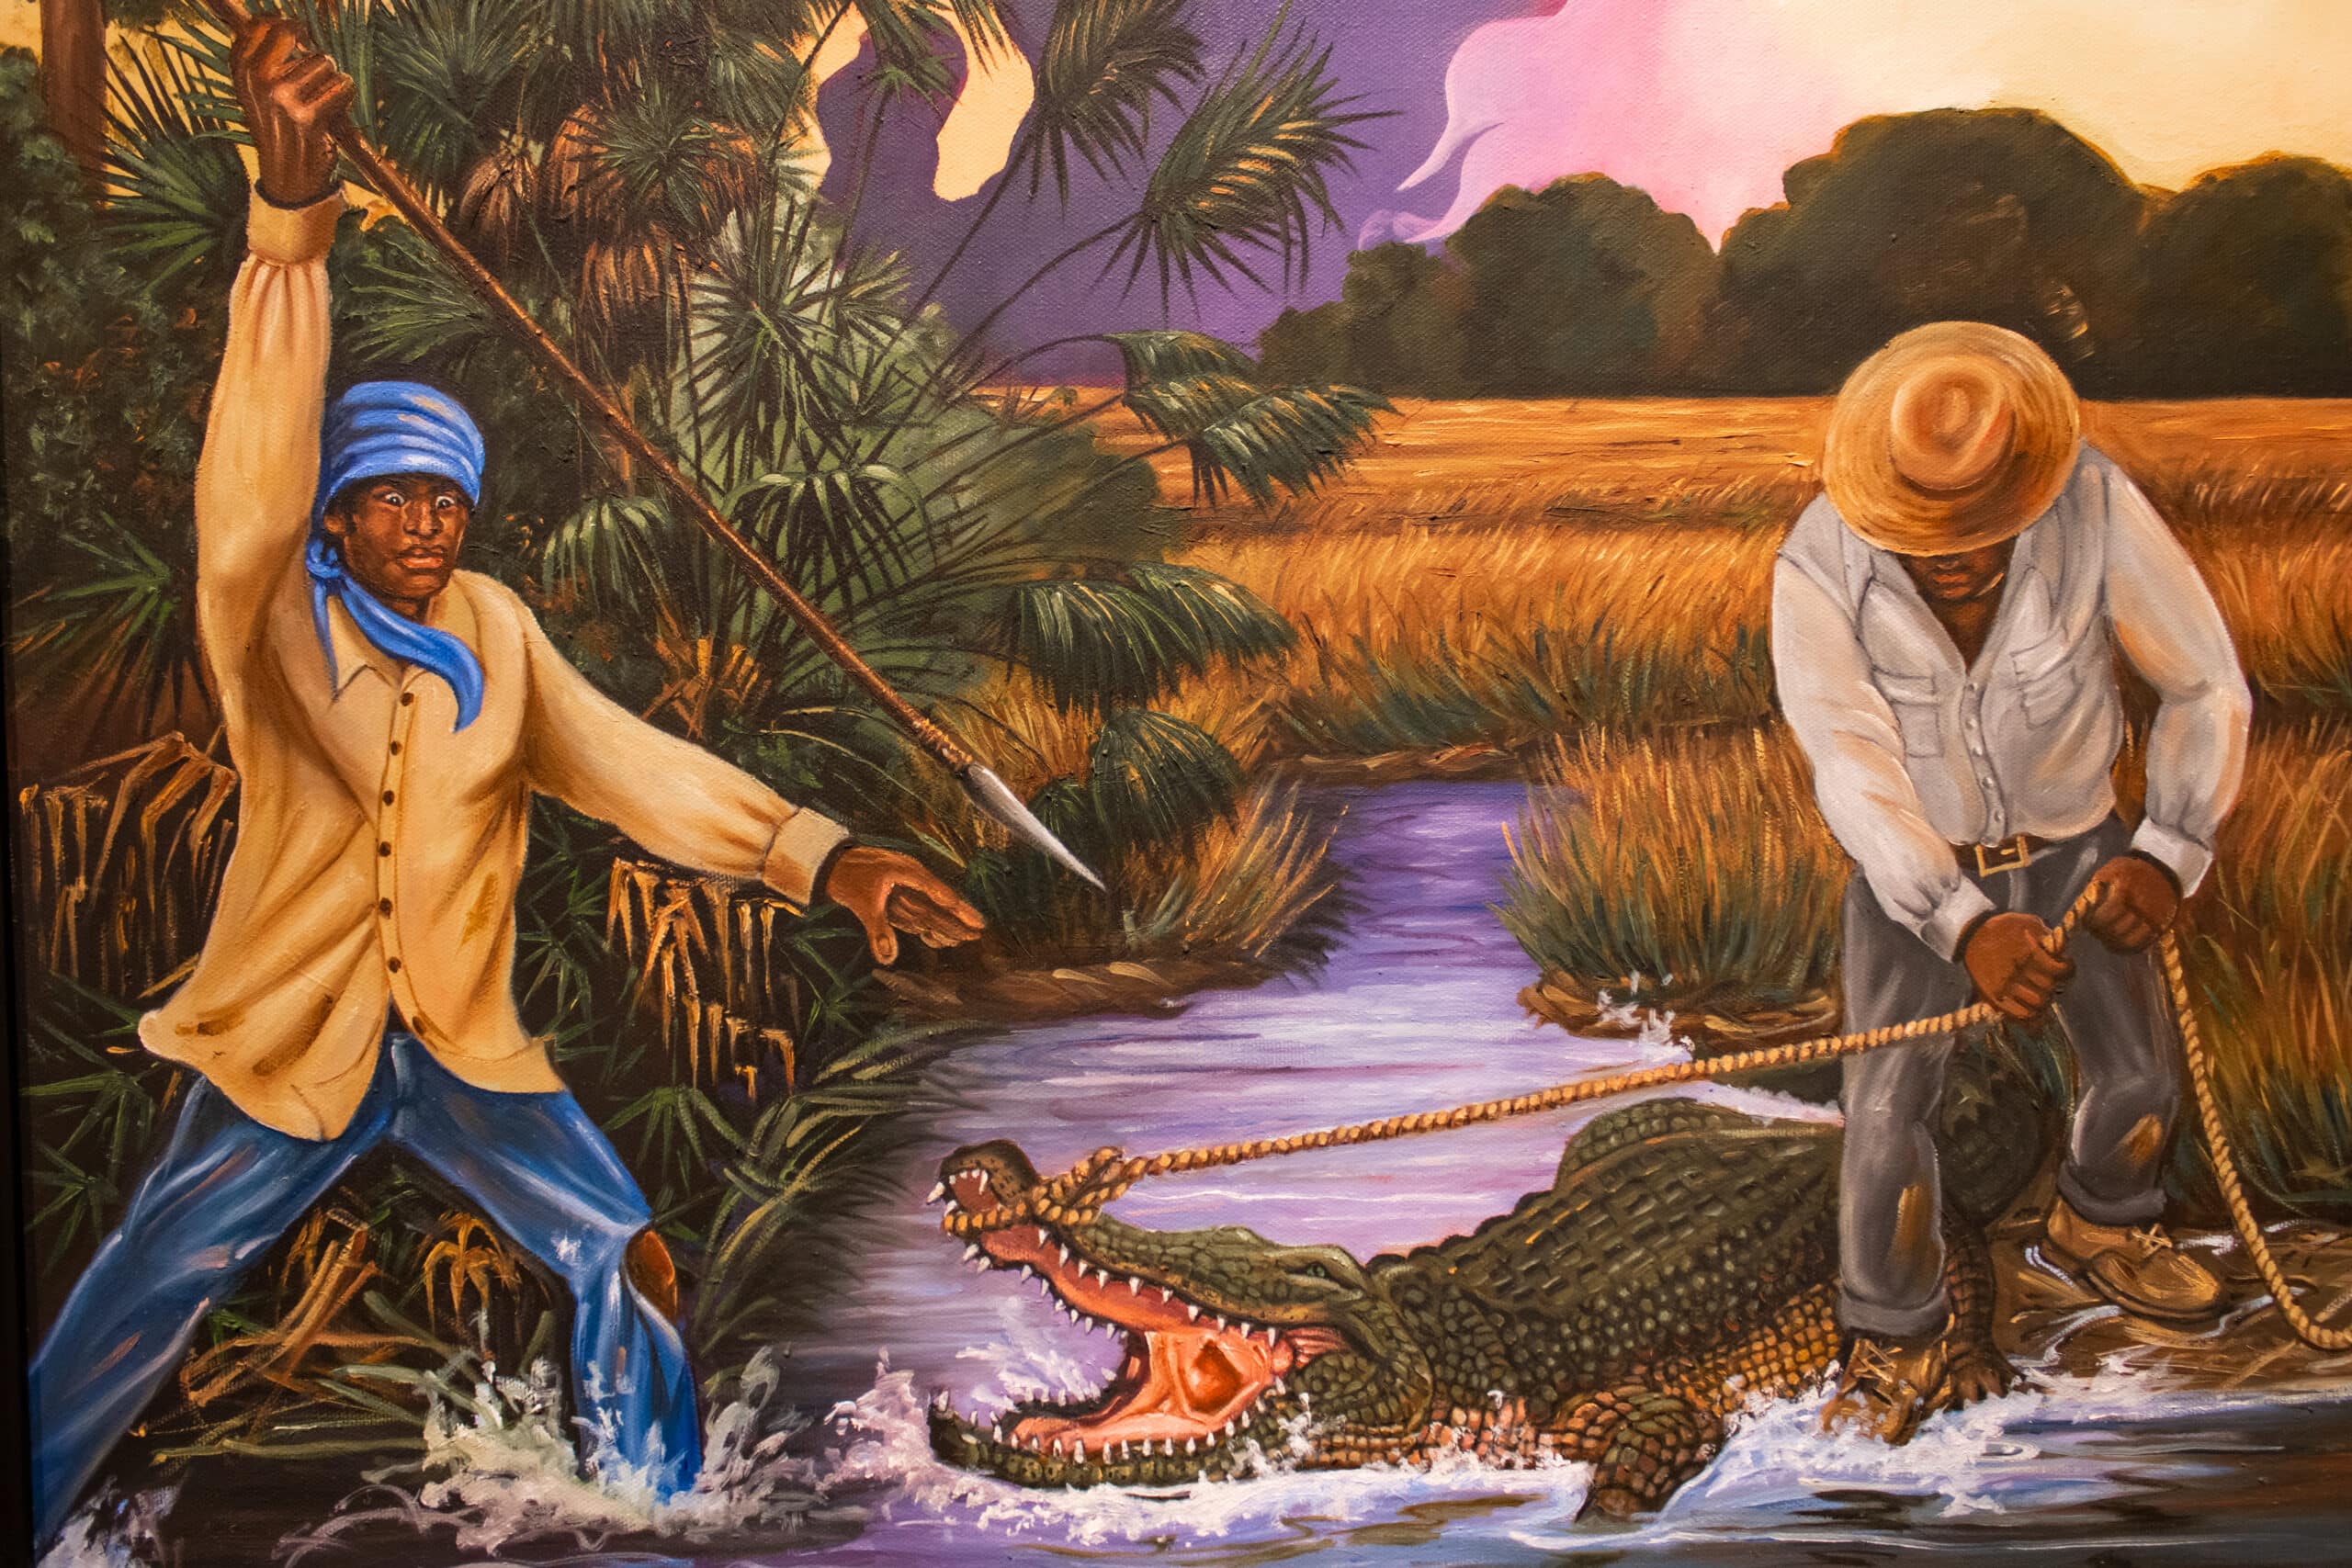 A vibrant painting of a Black Seminole with a spear about to strike an attacking alligator as another Black man in a straw hat restrains it with a rope.